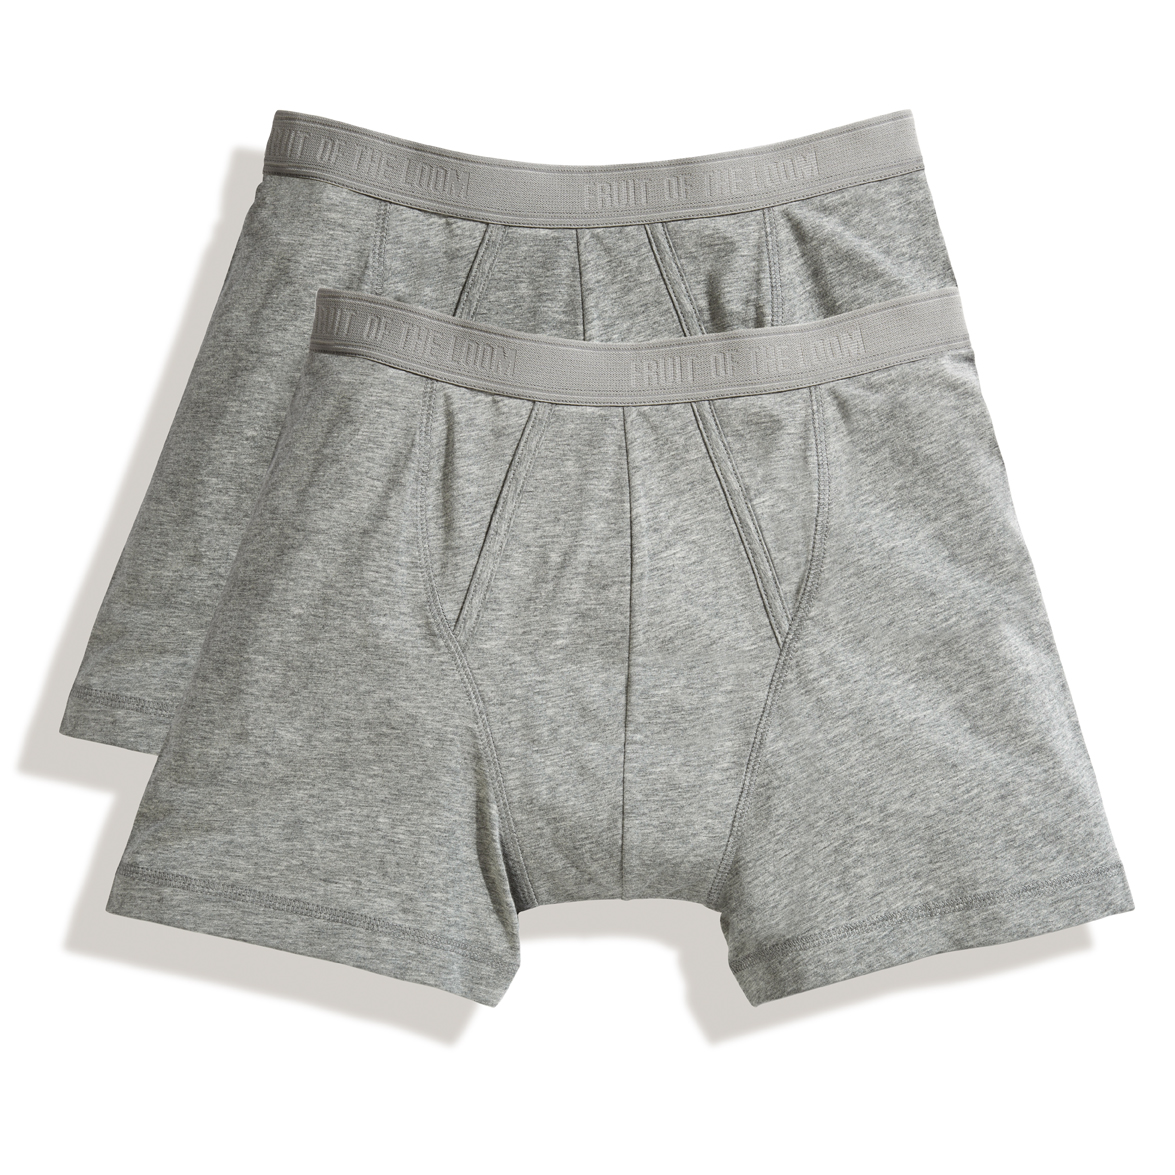 CLASSIC BOXER 2 PACK | Fruit Of The Loom